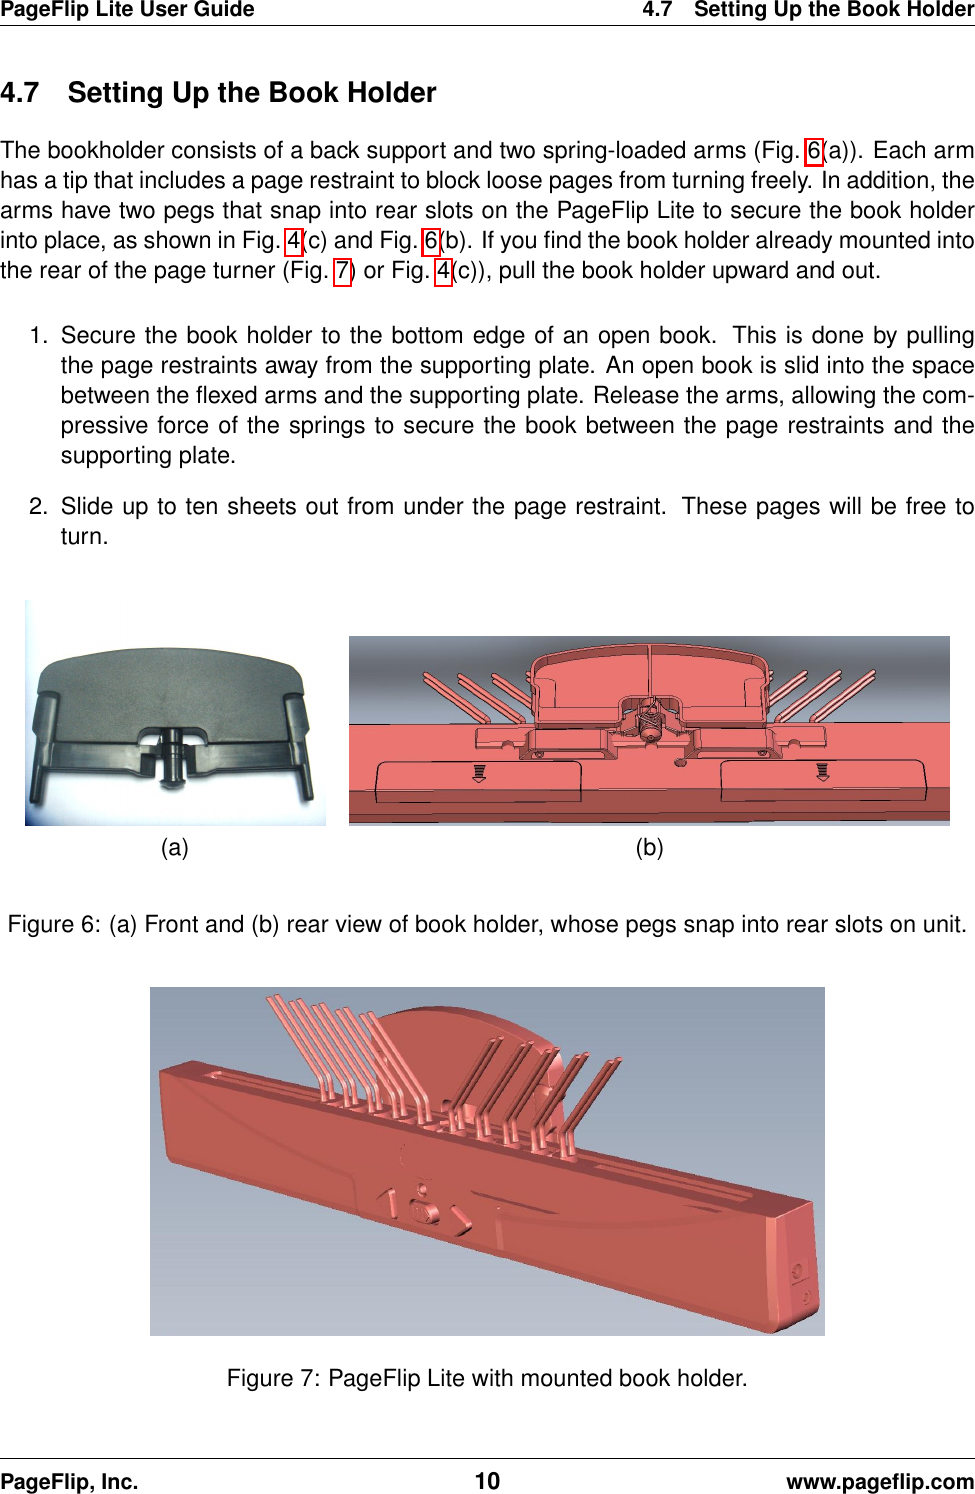 PageFlip Lite User Guide 4.7 Setting Up the Book Holder4.7 Setting Up the Book HolderThe bookholder consists of a back support and two spring-loaded arms (Fig. 6(a)). Each armhas a tip that includes a page restraint to block loose pages from turning freely. In addition, thearms have two pegs that snap into rear slots on the PageFlip Lite to secure the book holderinto place, as shown in Fig. 4(c) and Fig. 6(b). If you ﬁnd the book holder already mounted intothe rear of the page turner (Fig. 7) or Fig. 4(c)), pull the book holder upward and out.1. Secure the book holder to the bottom edge of an open book. This is done by pullingthe page restraints away from the supporting plate. An open book is slid into the spacebetween the ﬂexed arms and the supporting plate. Release the arms, allowing the com-pressive force of the springs to secure the book between the page restraints and thesupporting plate.2. Slide up to ten sheets out from under the page restraint. These pages will be free toturn.(a) (b)Figure 6: (a) Front and (b) rear view of book holder, whose pegs snap into rear slots on unit.Figure 7: PageFlip Lite with mounted book holder.PageFlip, Inc. 10 www.pageﬂip.com